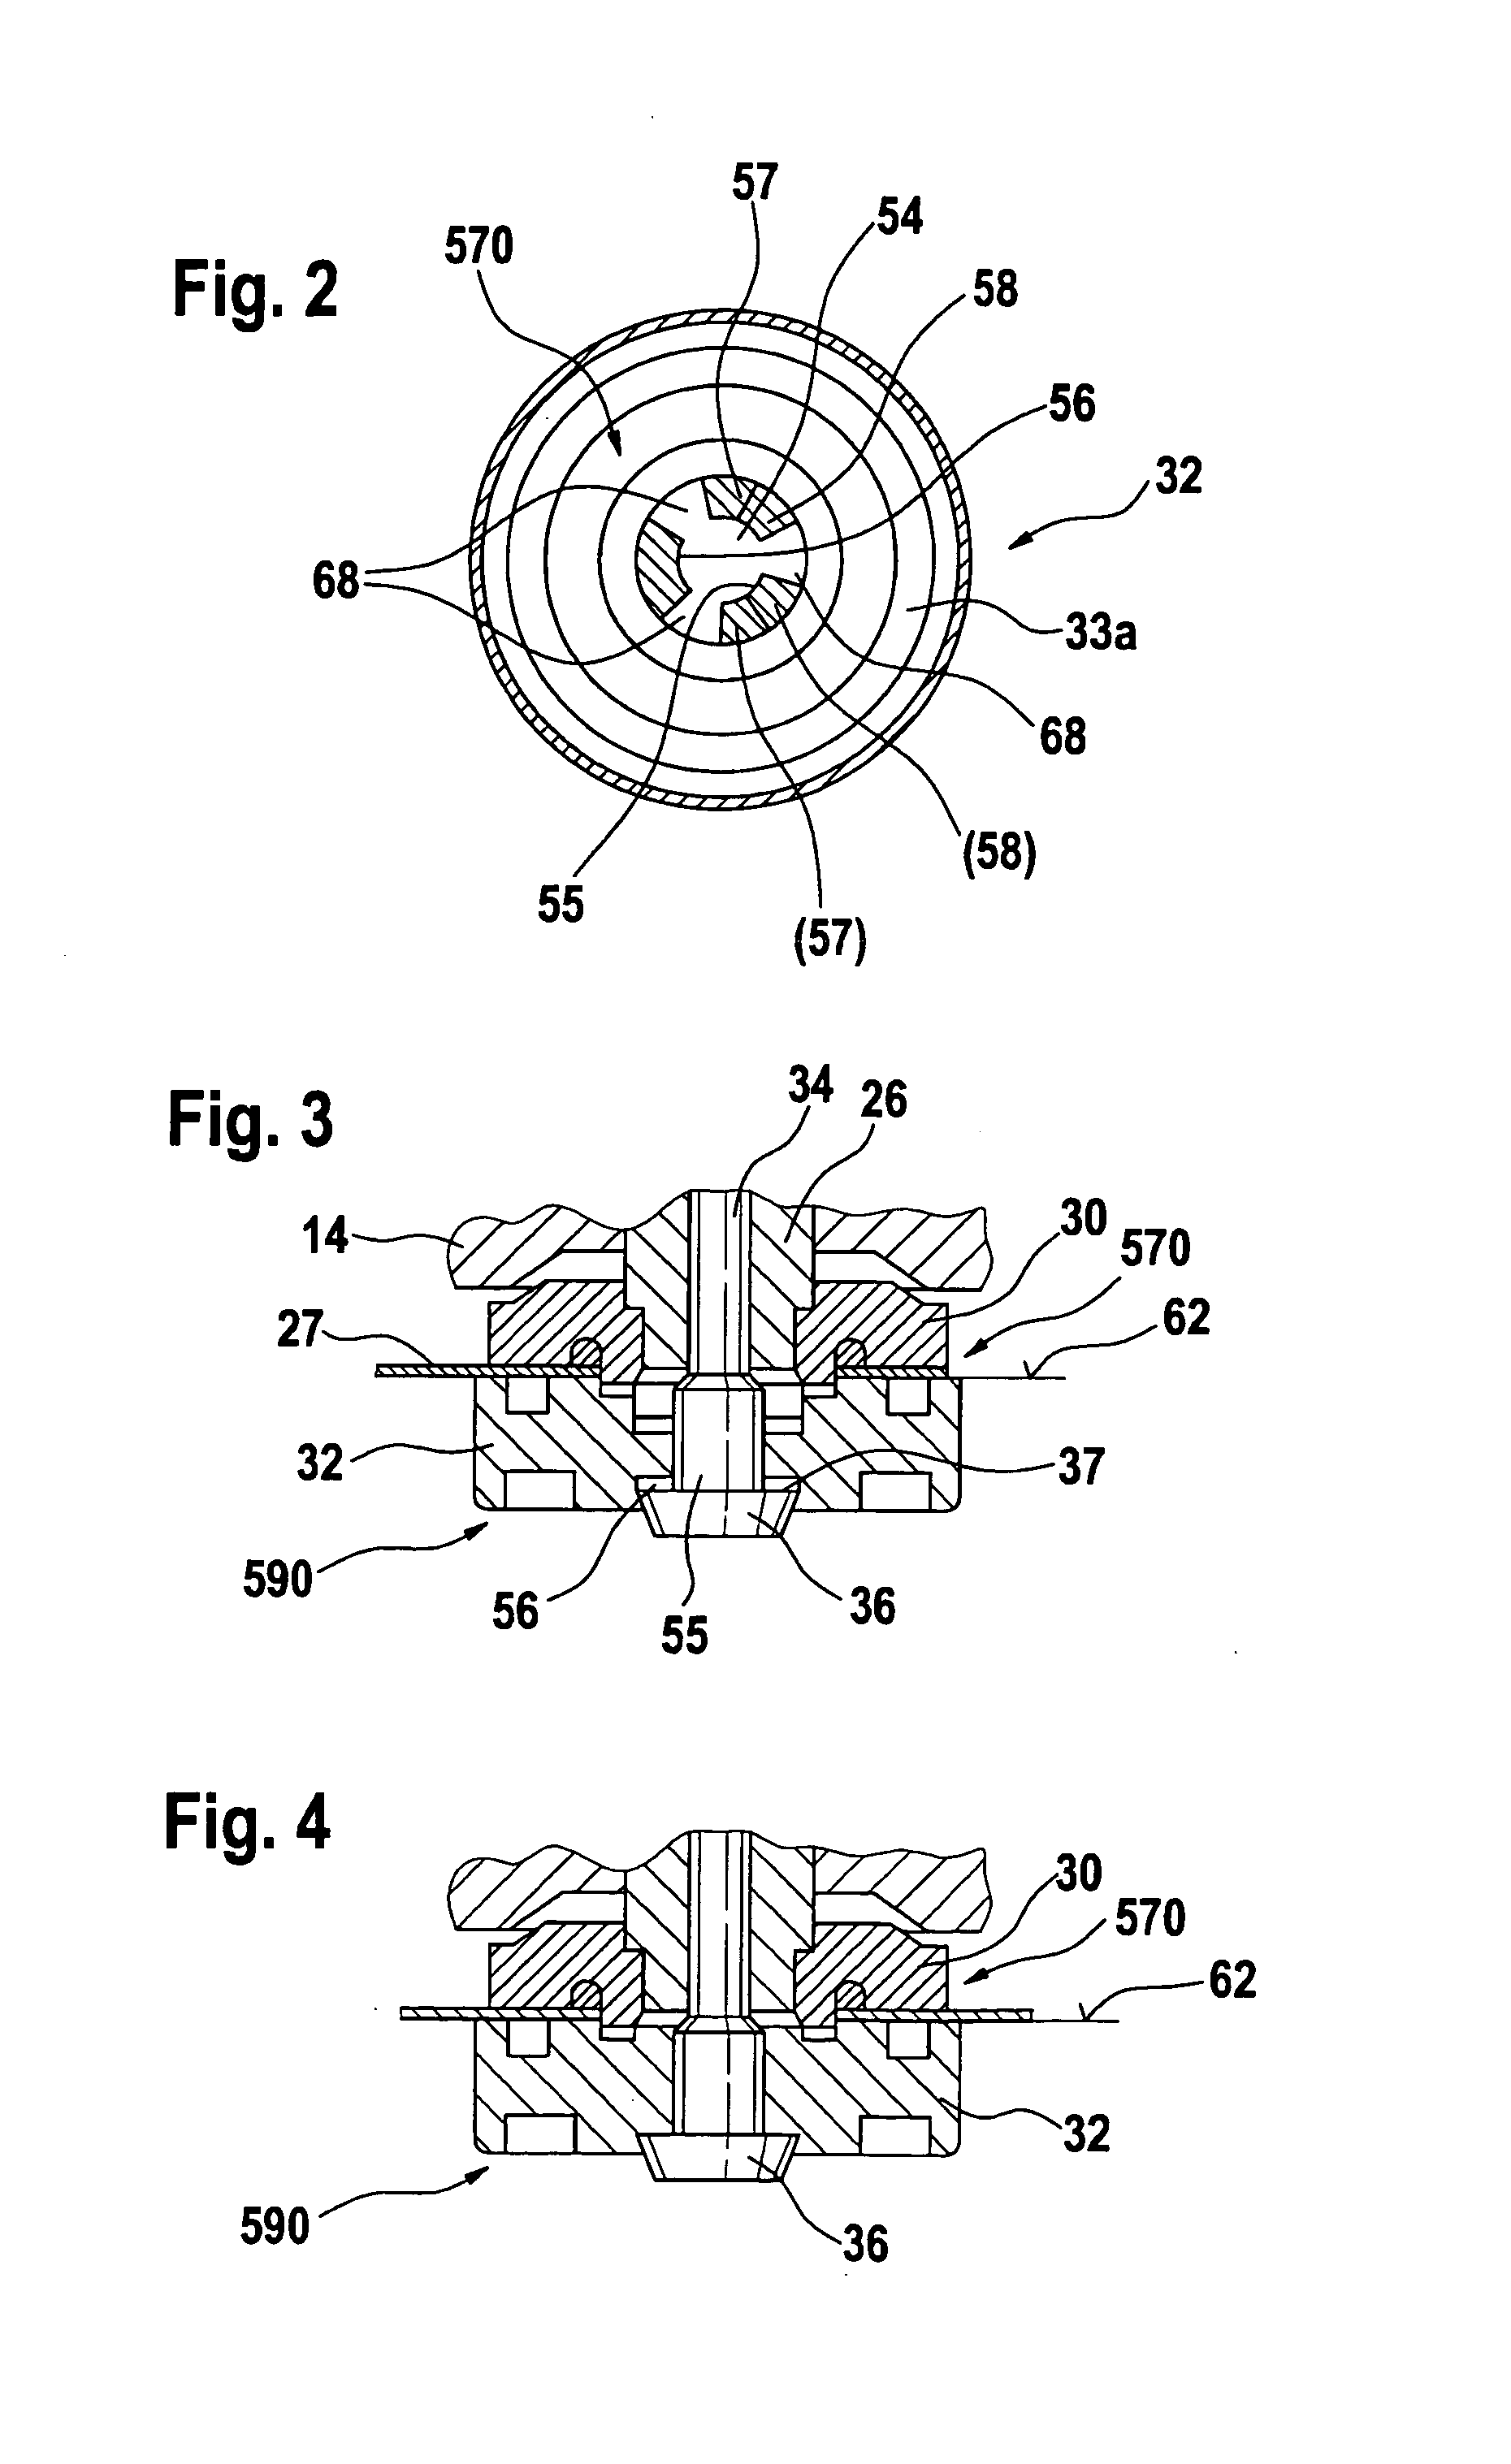 Hand machine tool with clamping device